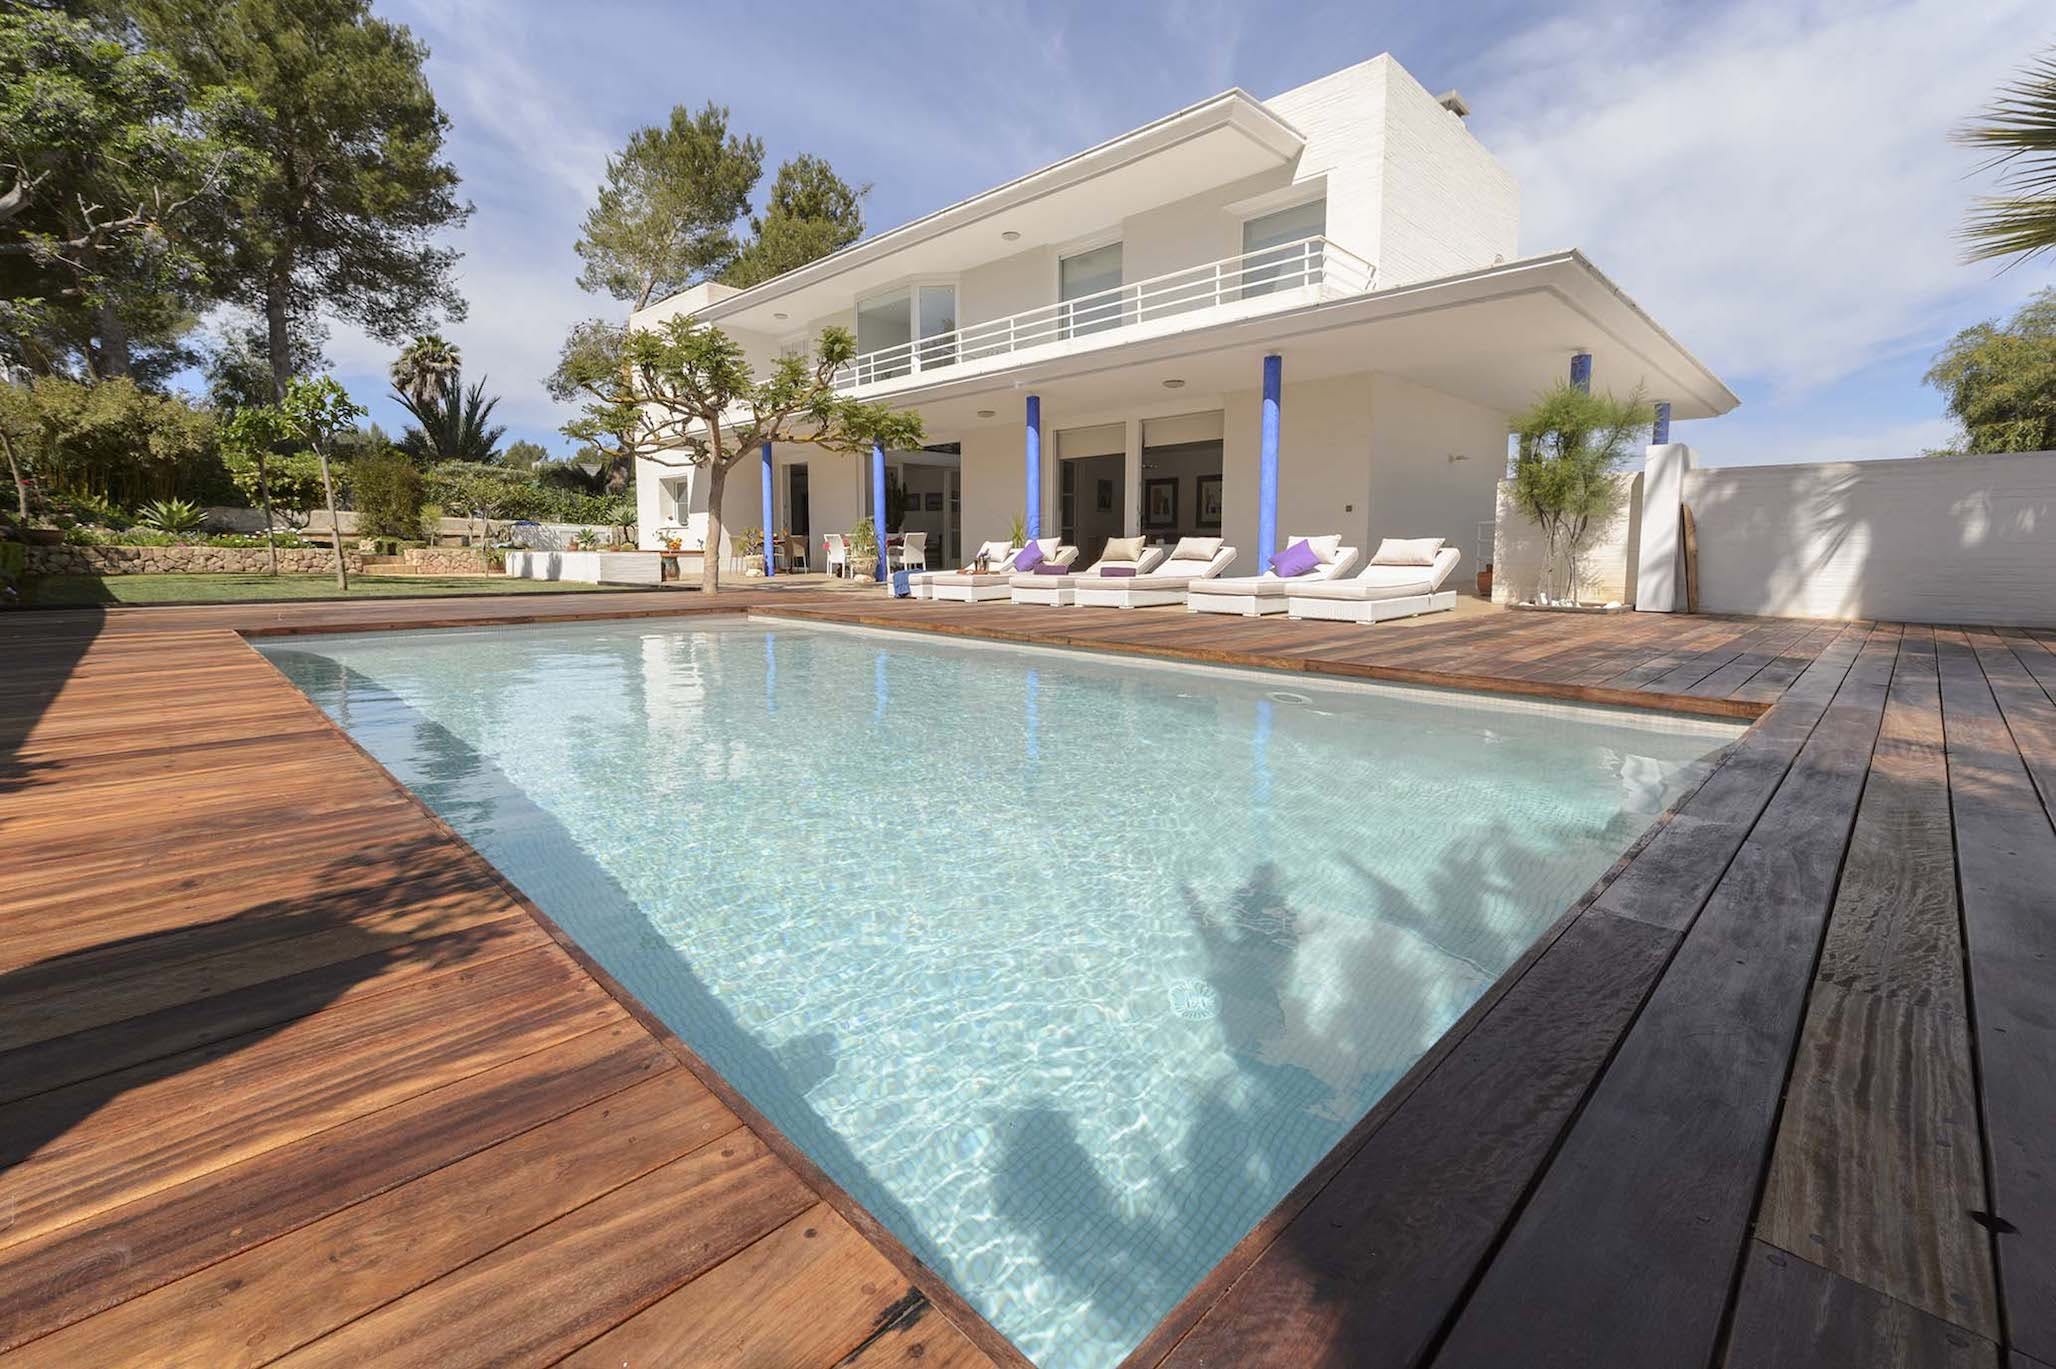 You are currently viewing Villa Demario – ‘Well-appointed villa on Ibiza’s glorious west coast, close to San Antonio.’